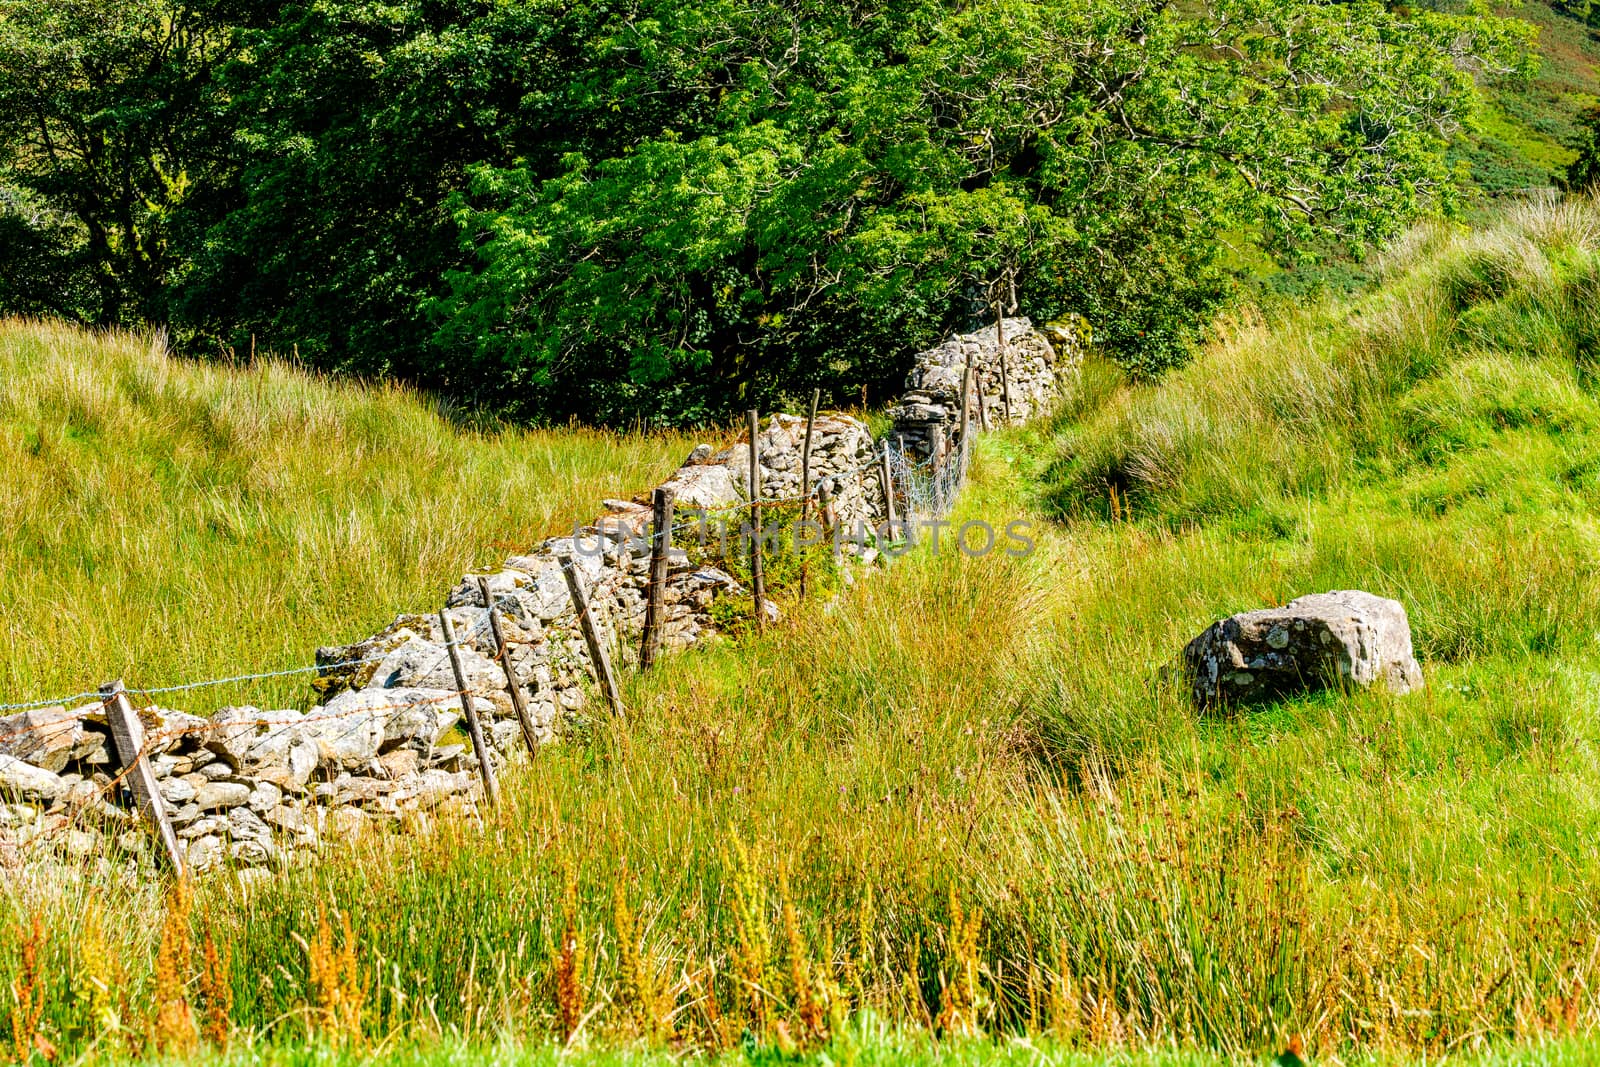 Typical dry stone wall in the countryside of The Lake District